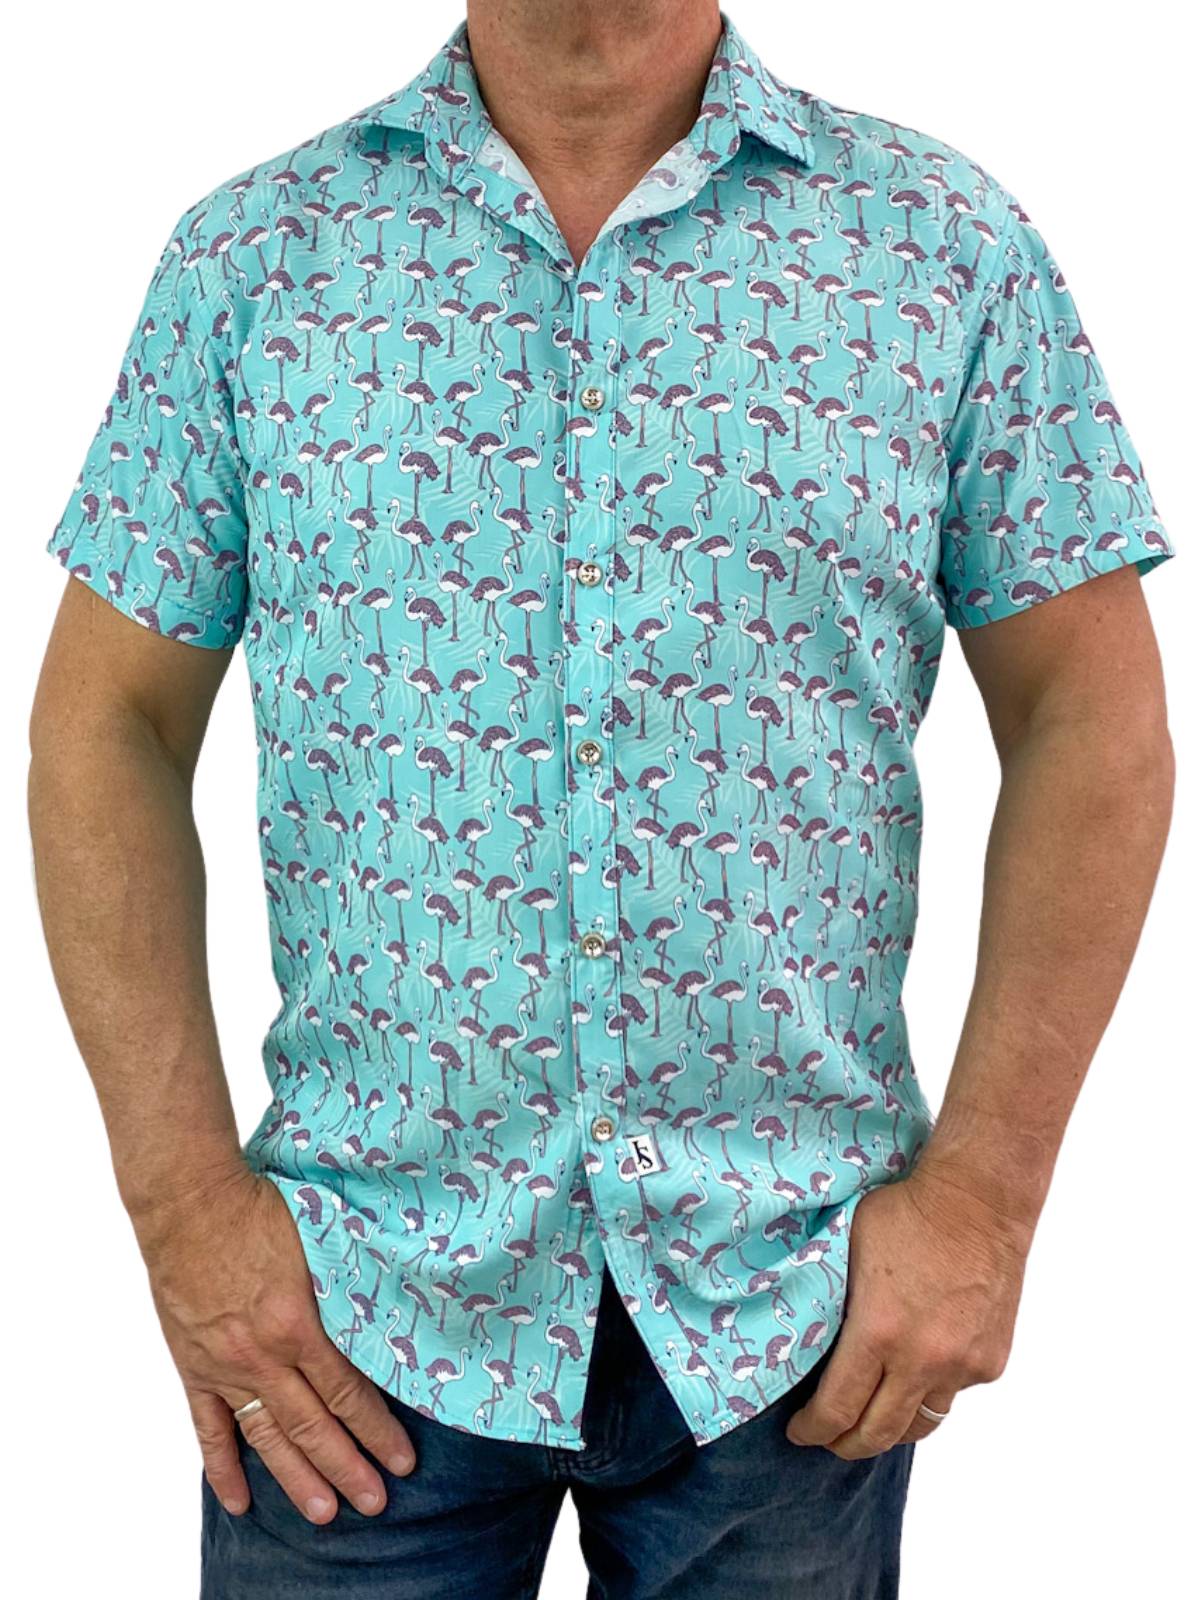 Sway Flamingo Cotton/Rayon S/S Shirt - Turquoise/Pink